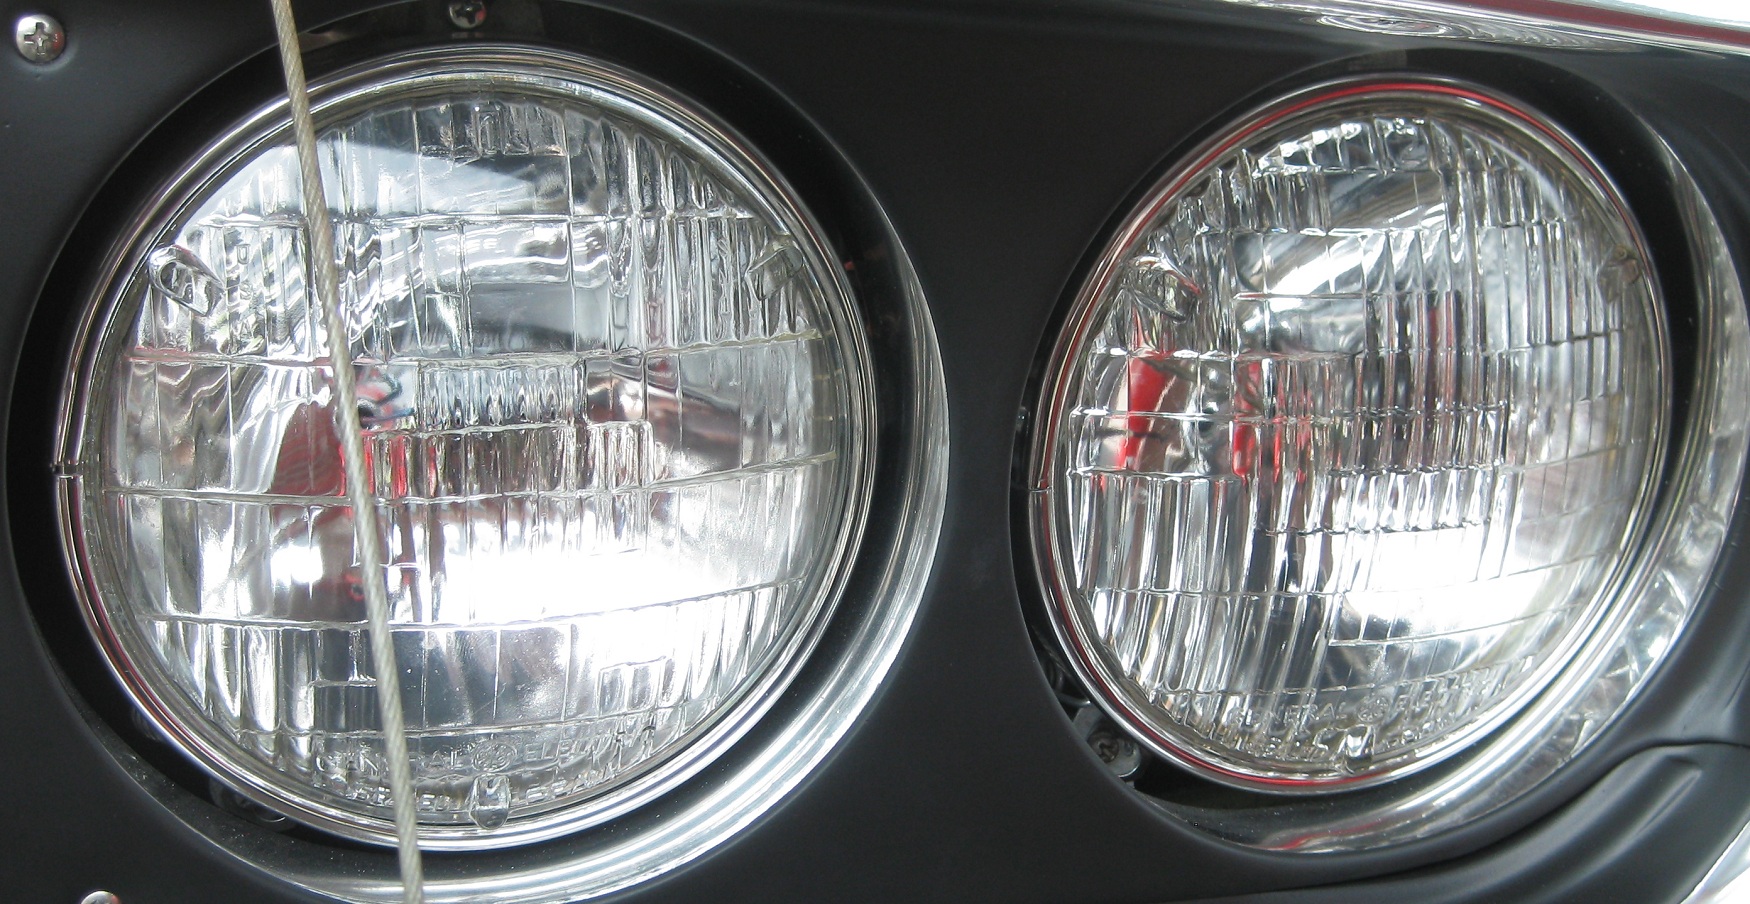 Attached picture 7328920-1970-LA-ebody-GE-headlights.jpg